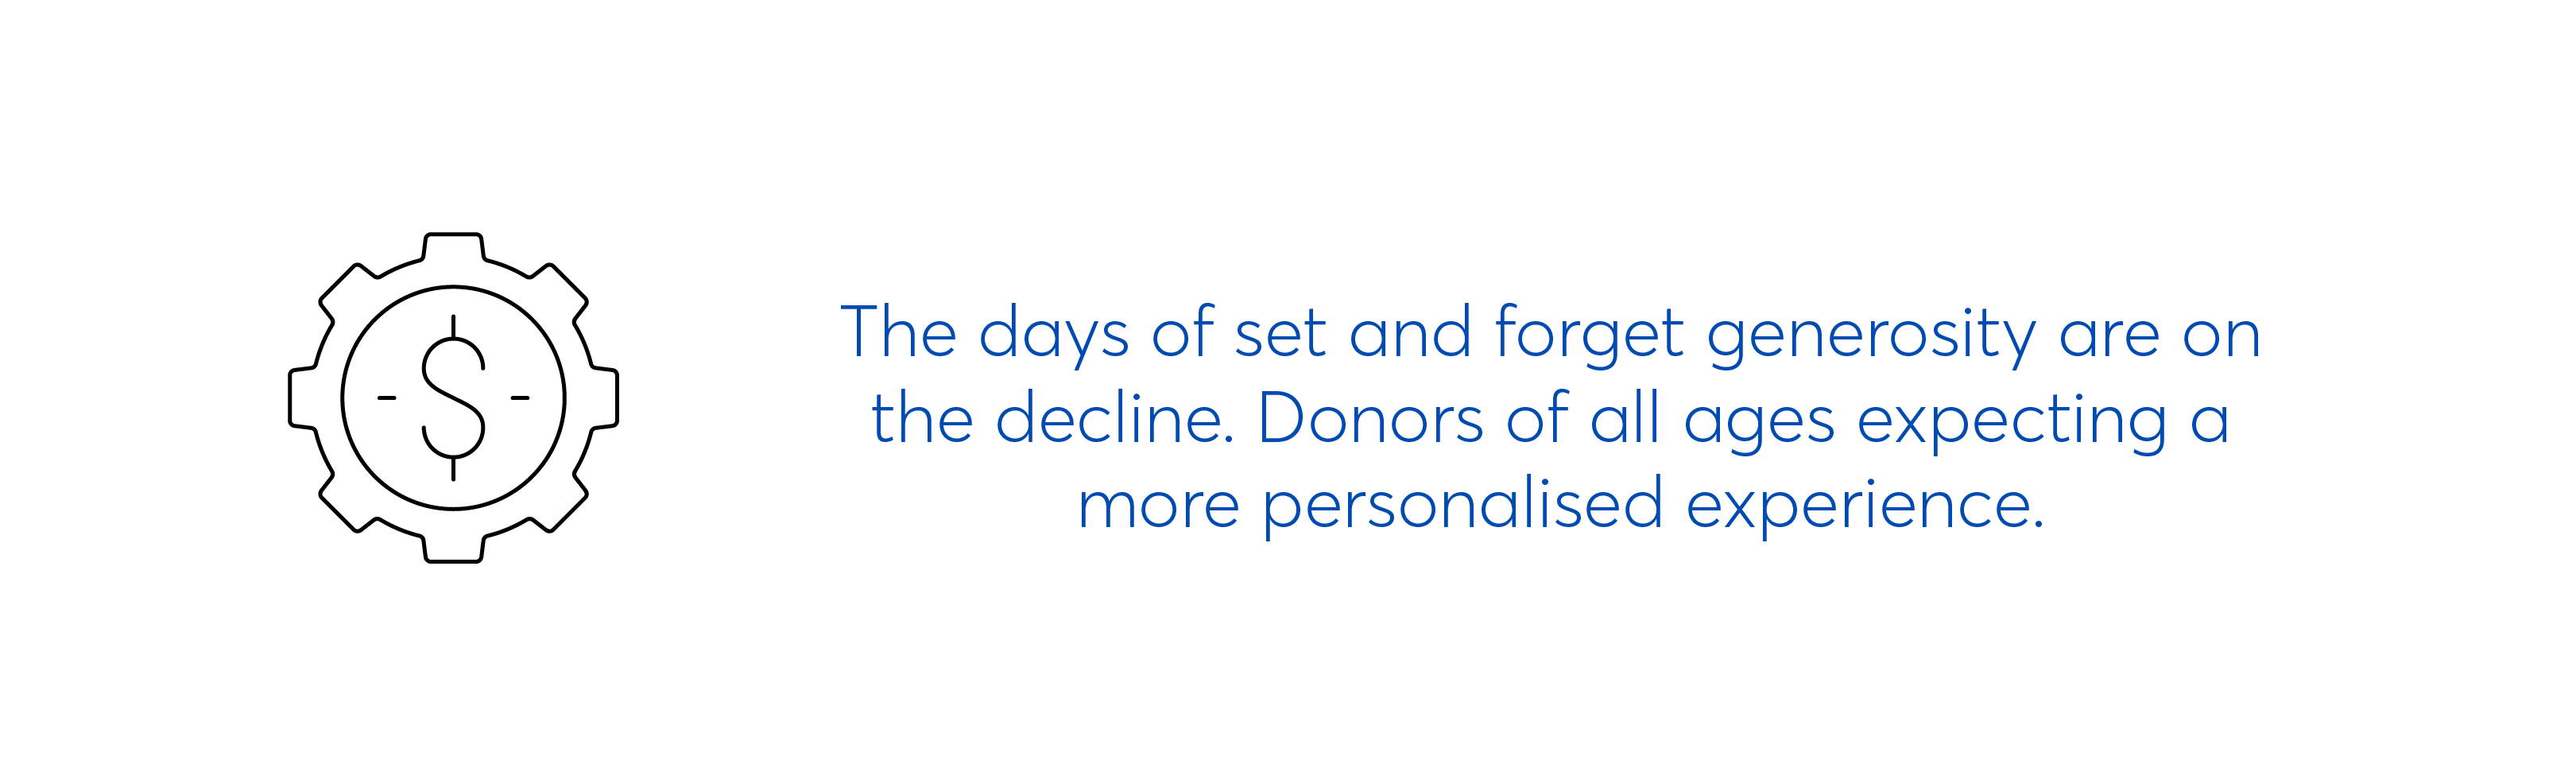 Donors are expecting a more personalised giving experience